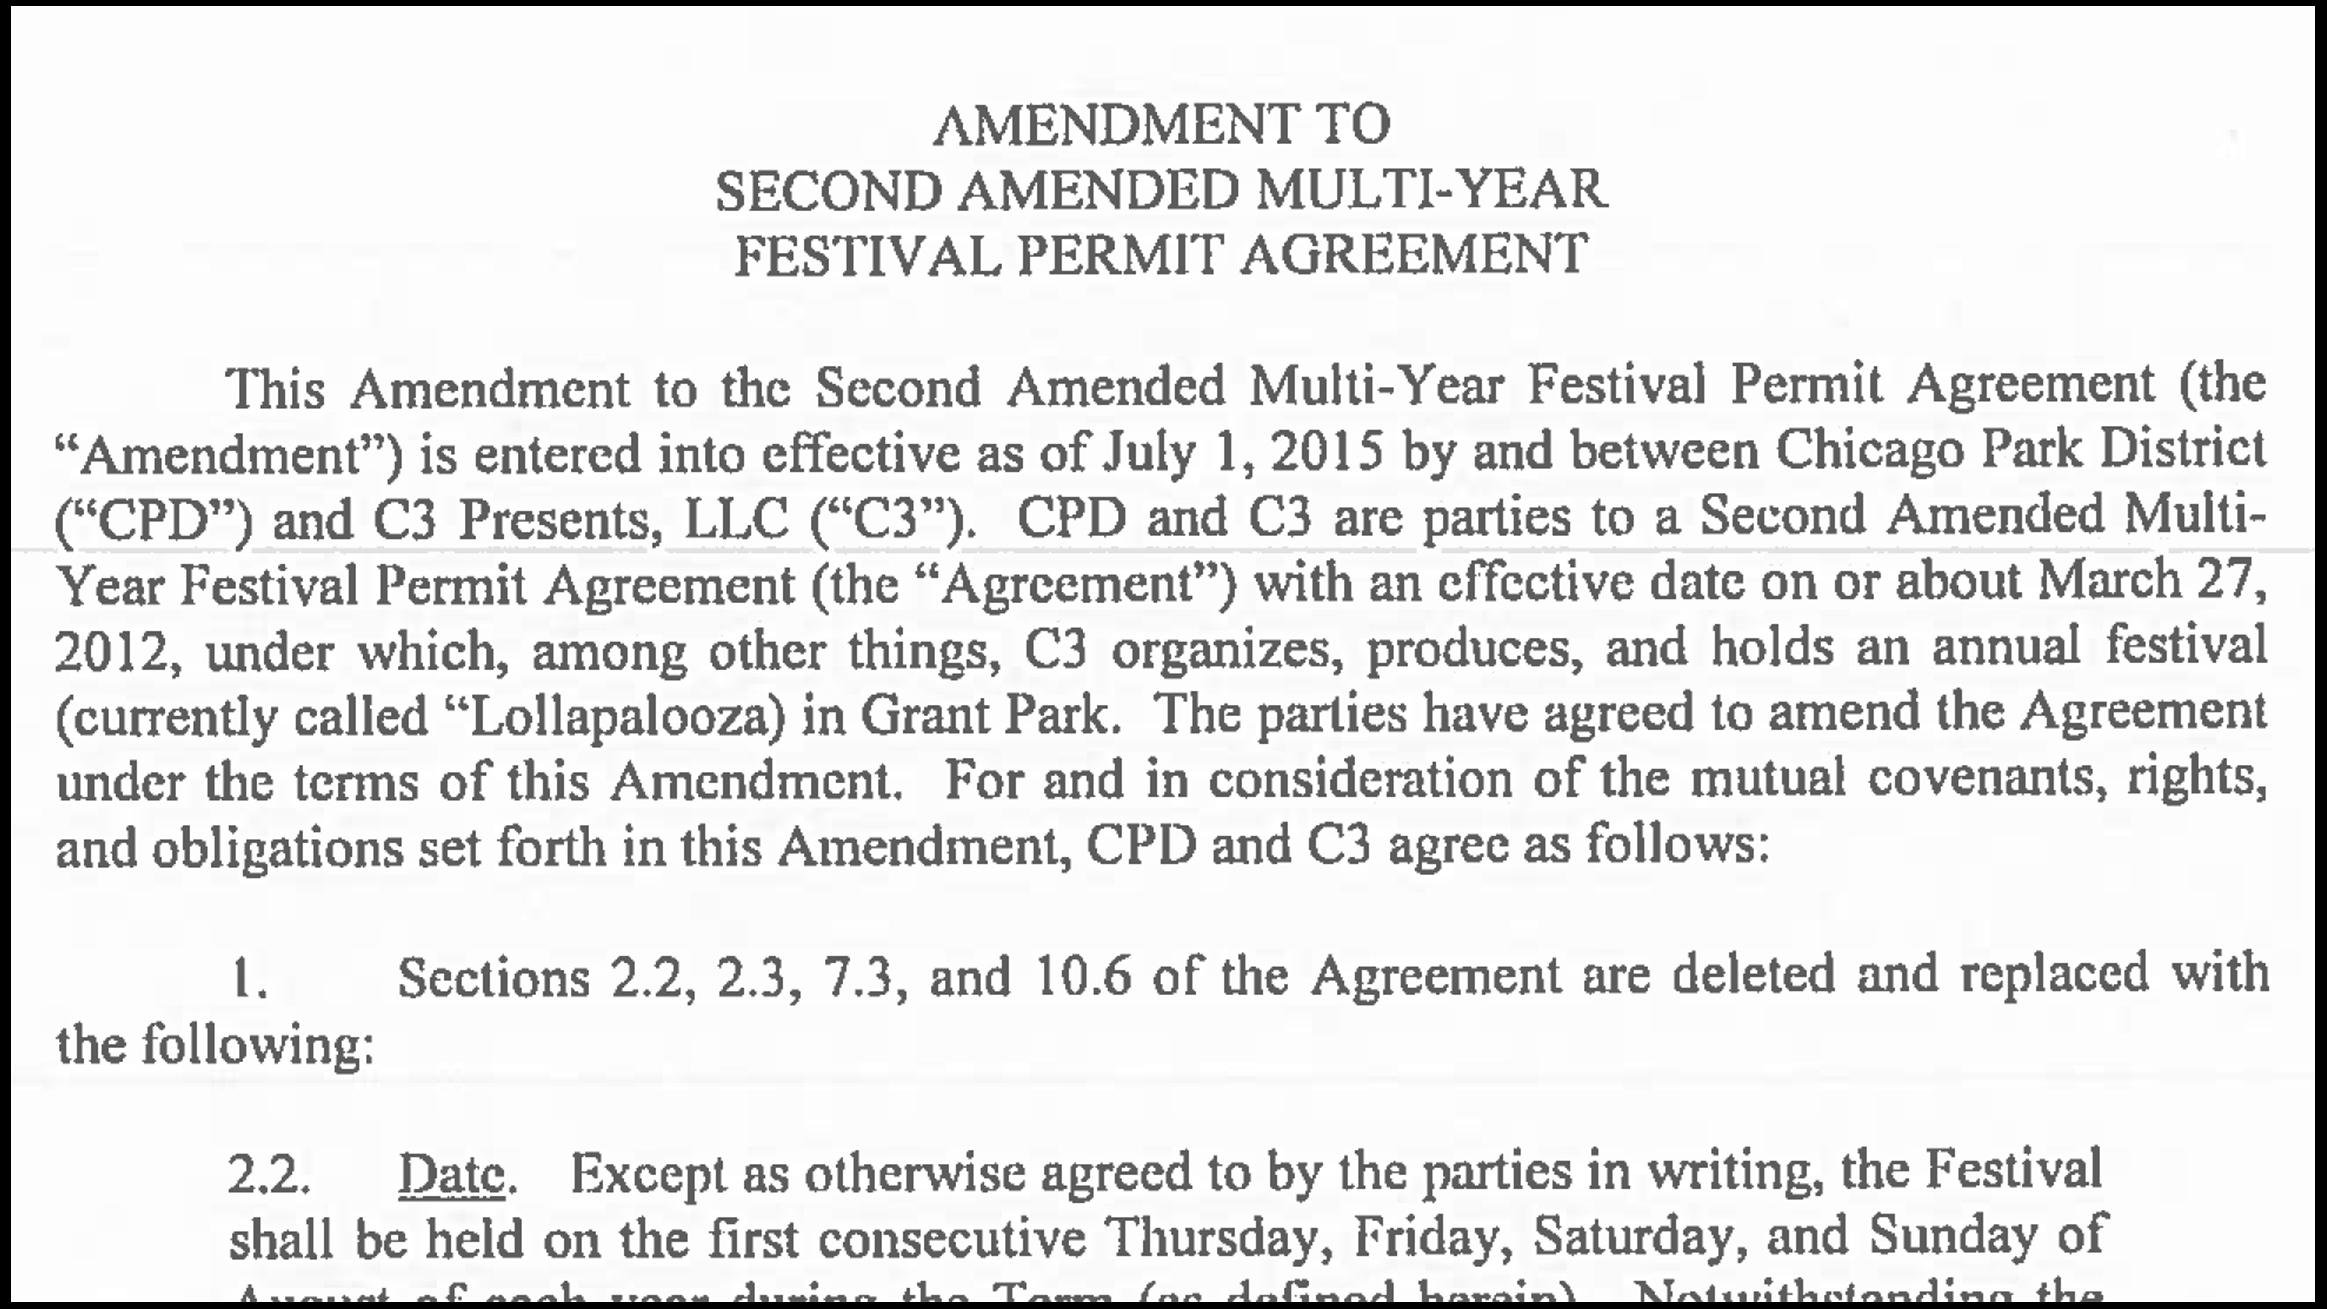 Document: Read the contract between the Park District and C3 Presents